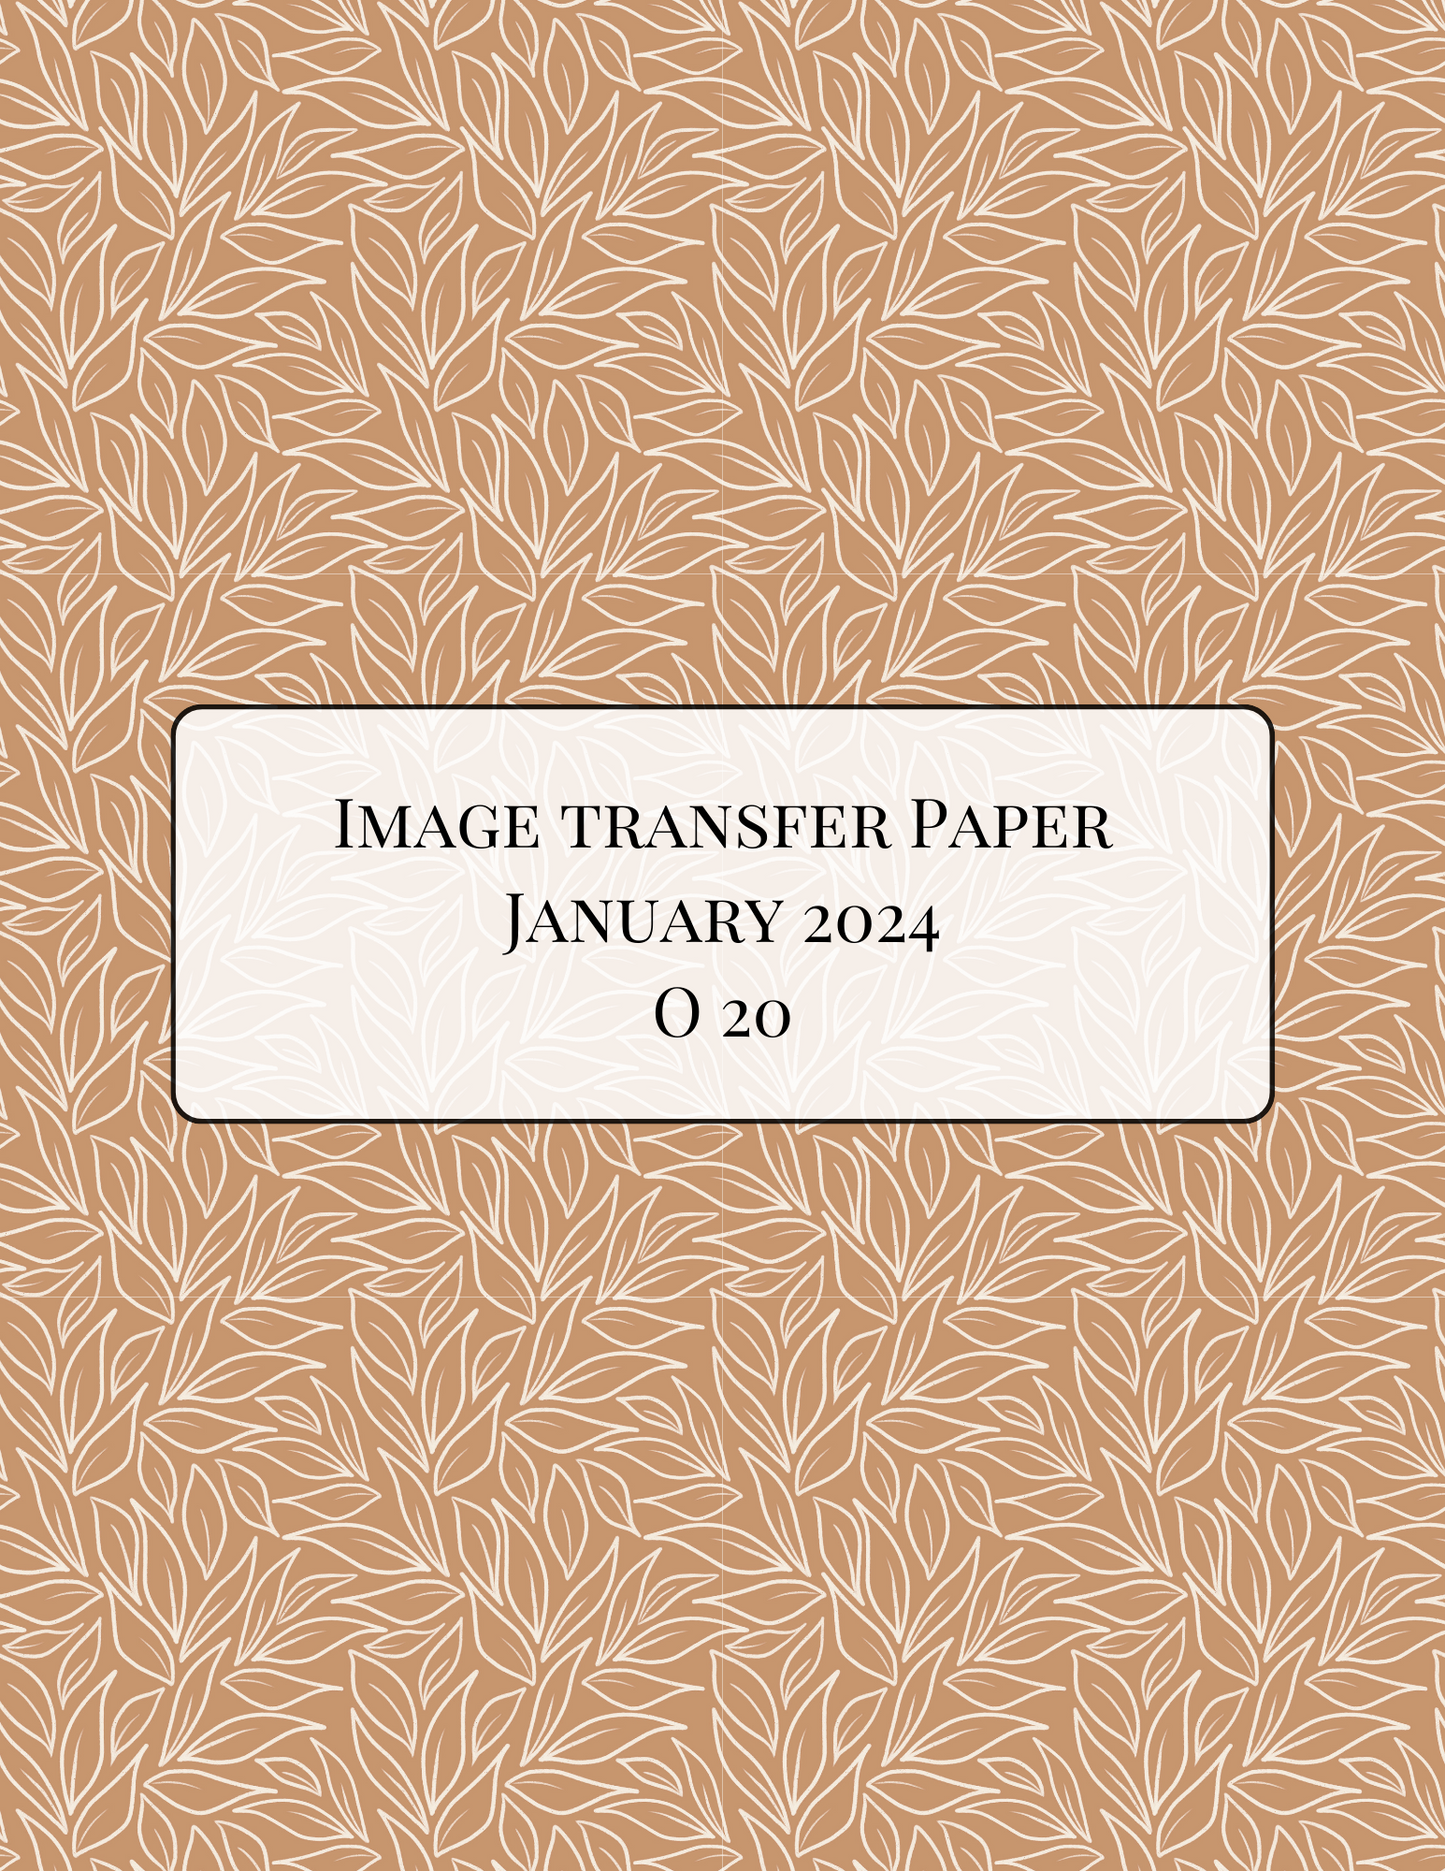 O20 Transfer Paper - January Launch